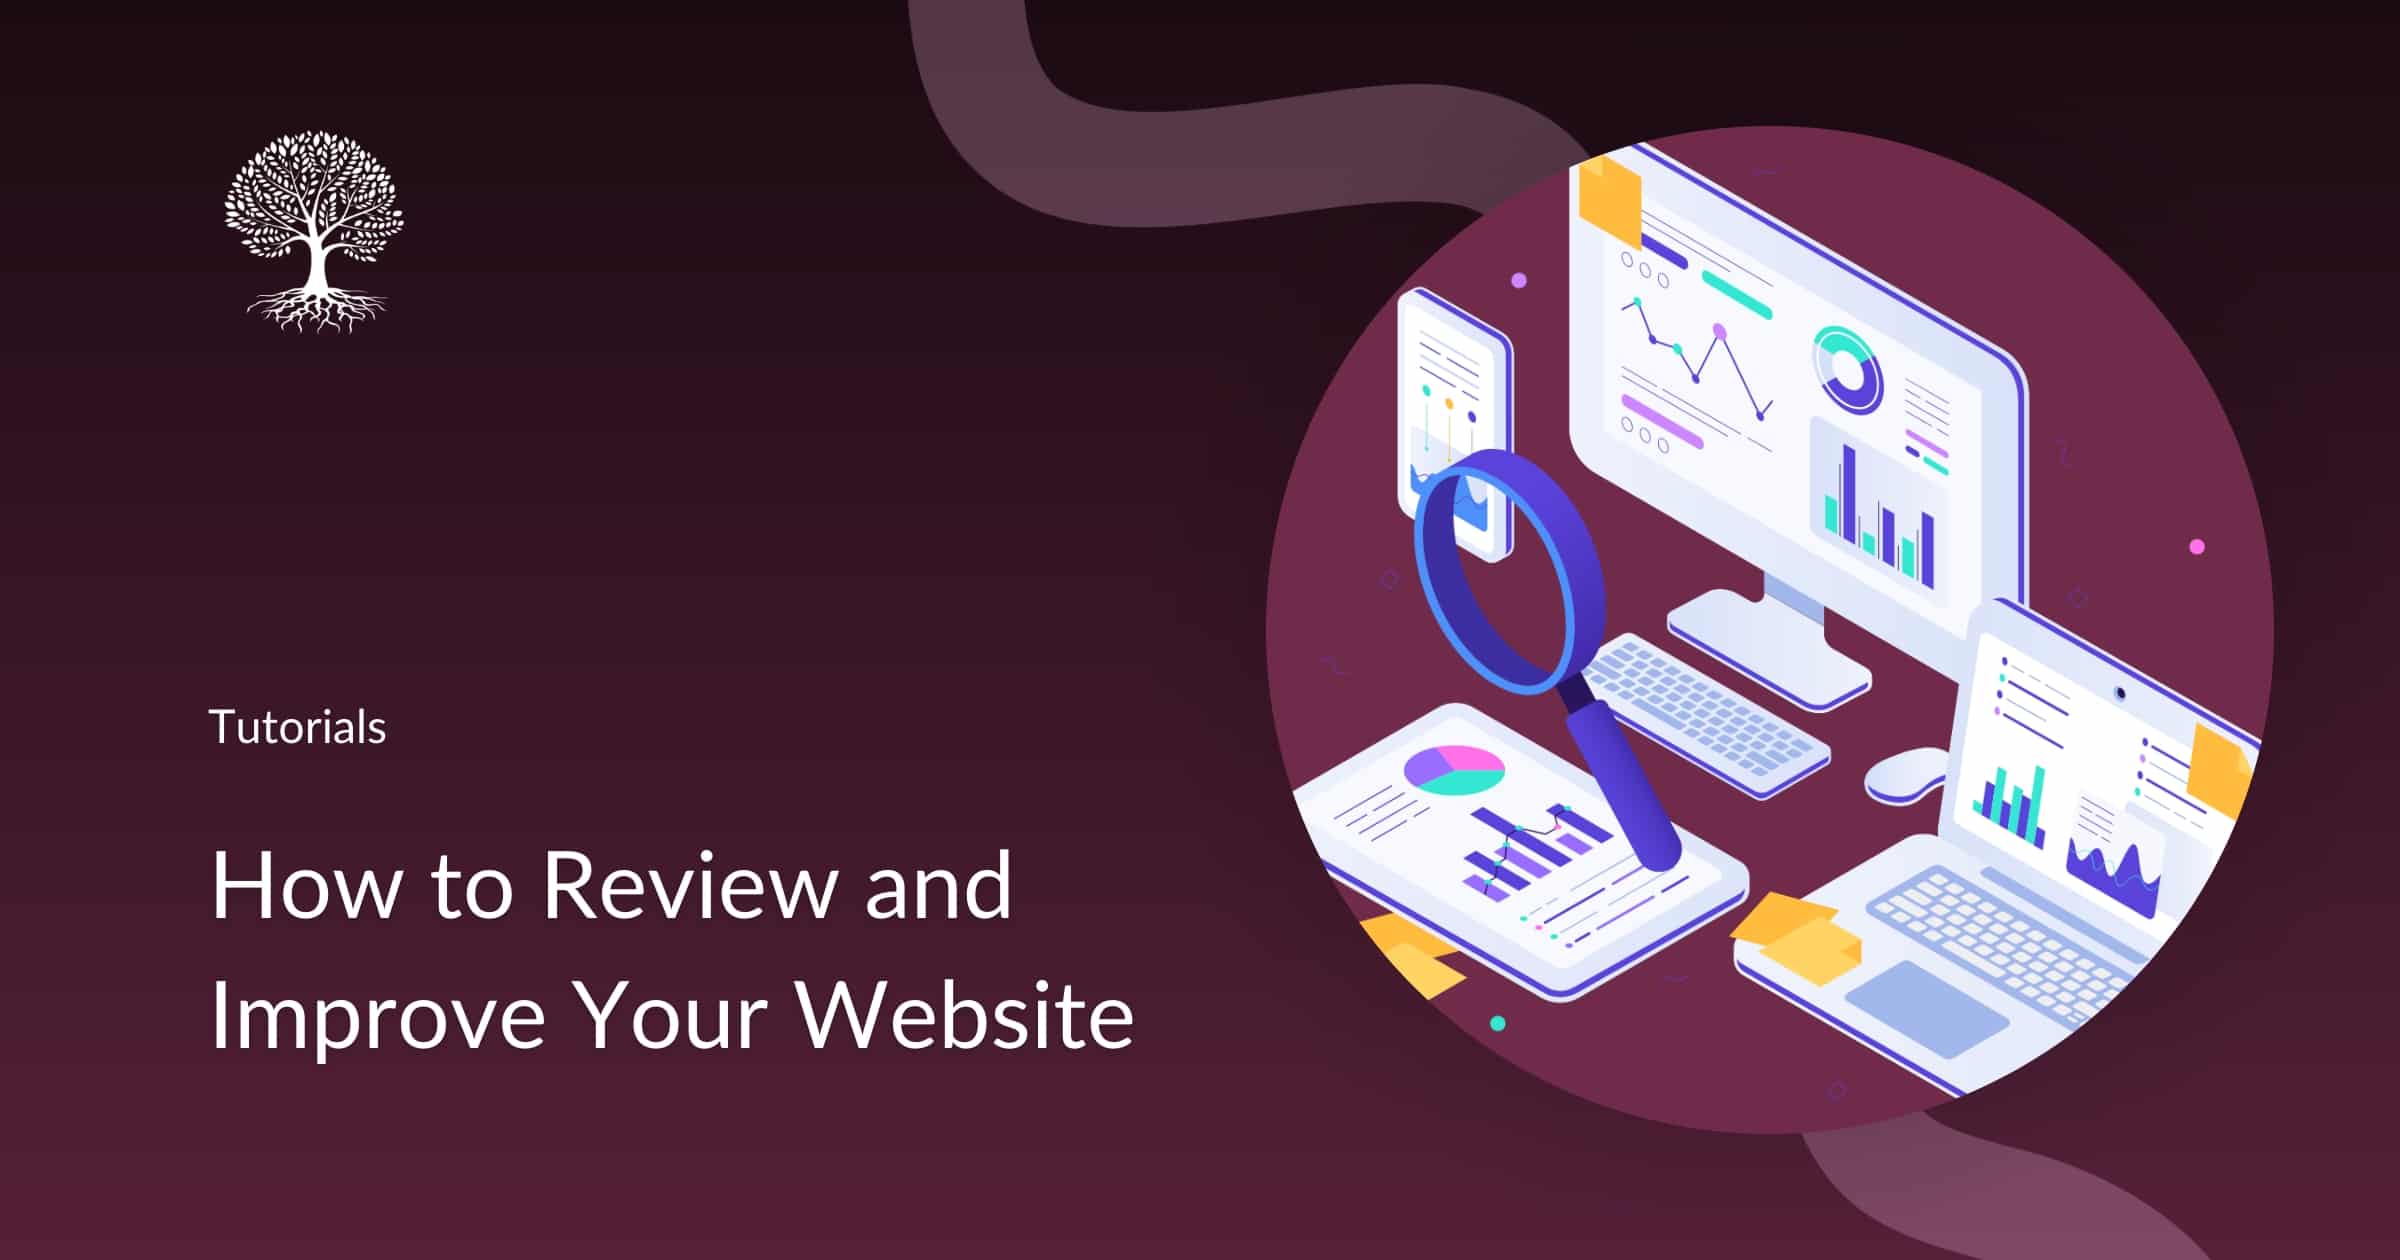 website review 101 how to improve your website for higher profits and better user experience unity web design